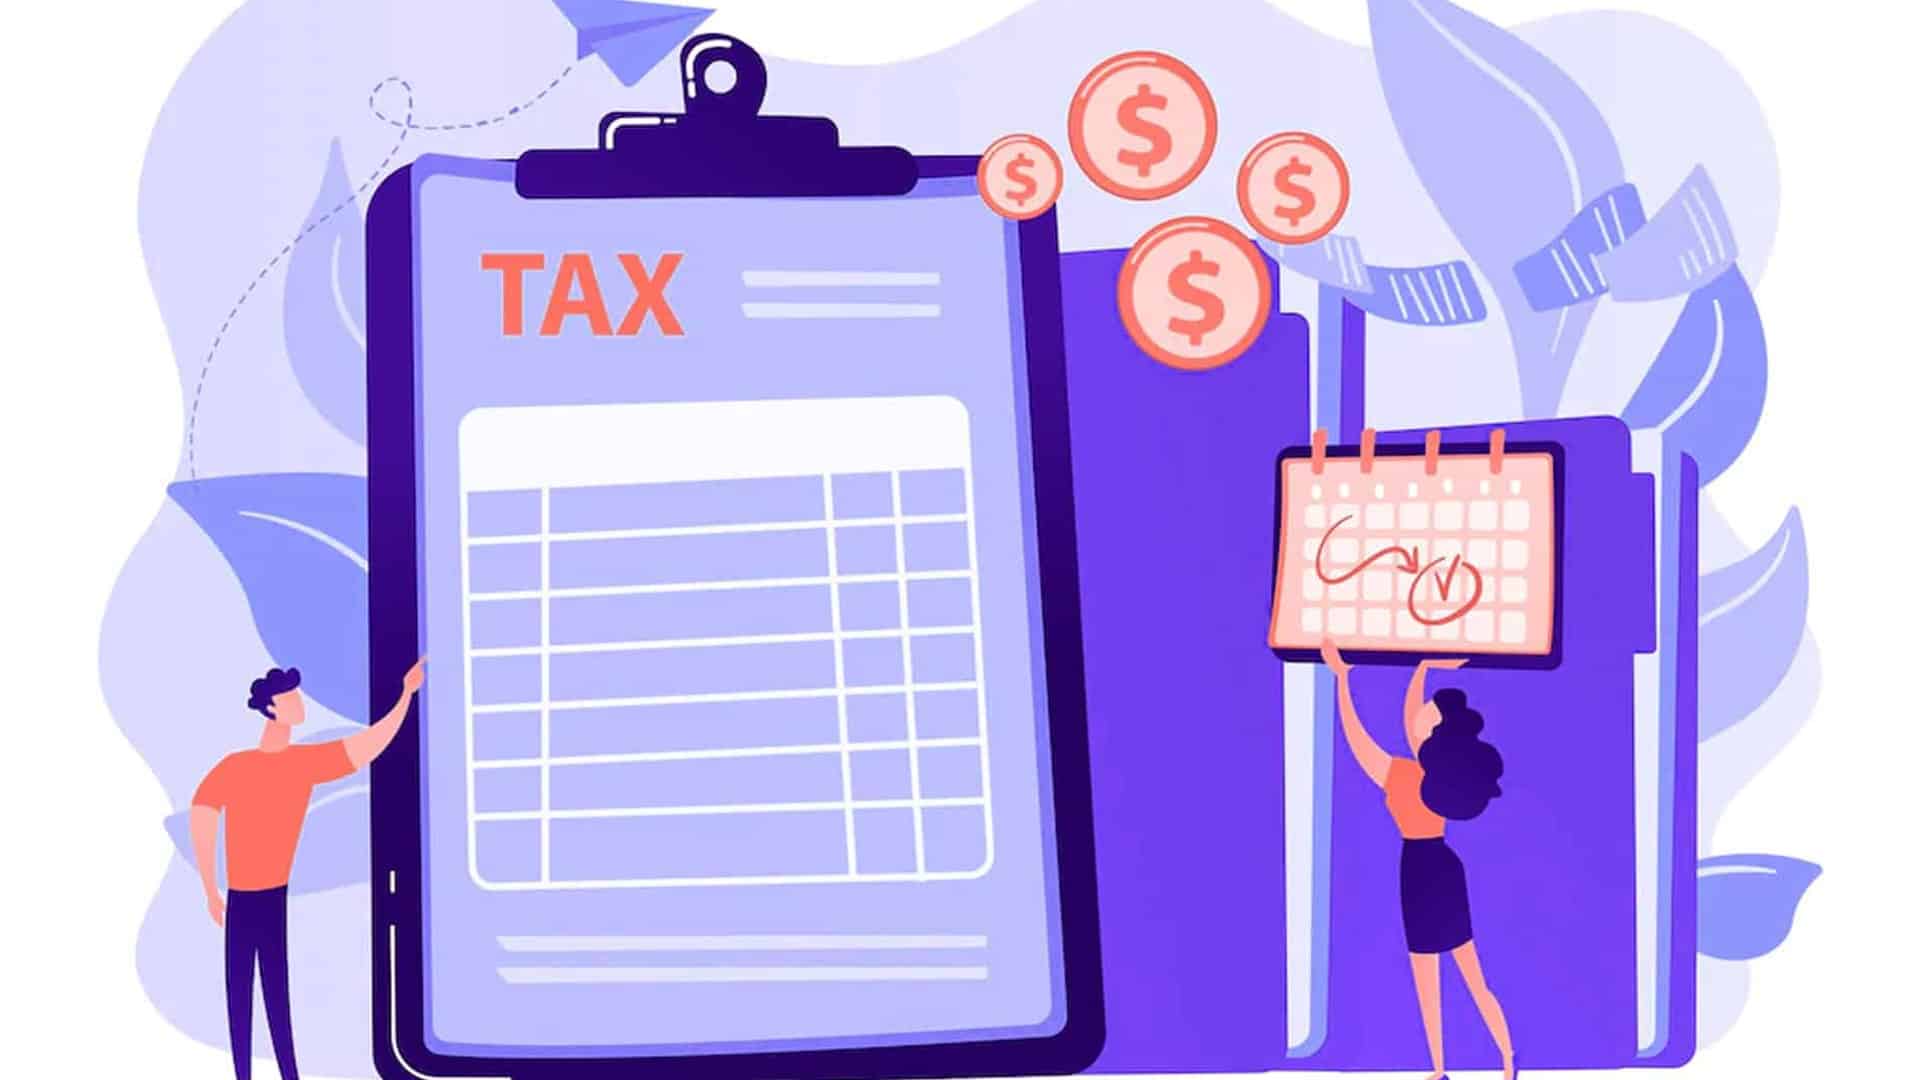 Employers to ask employees about preferred tax regime for deducting TDS from salary: CBDT